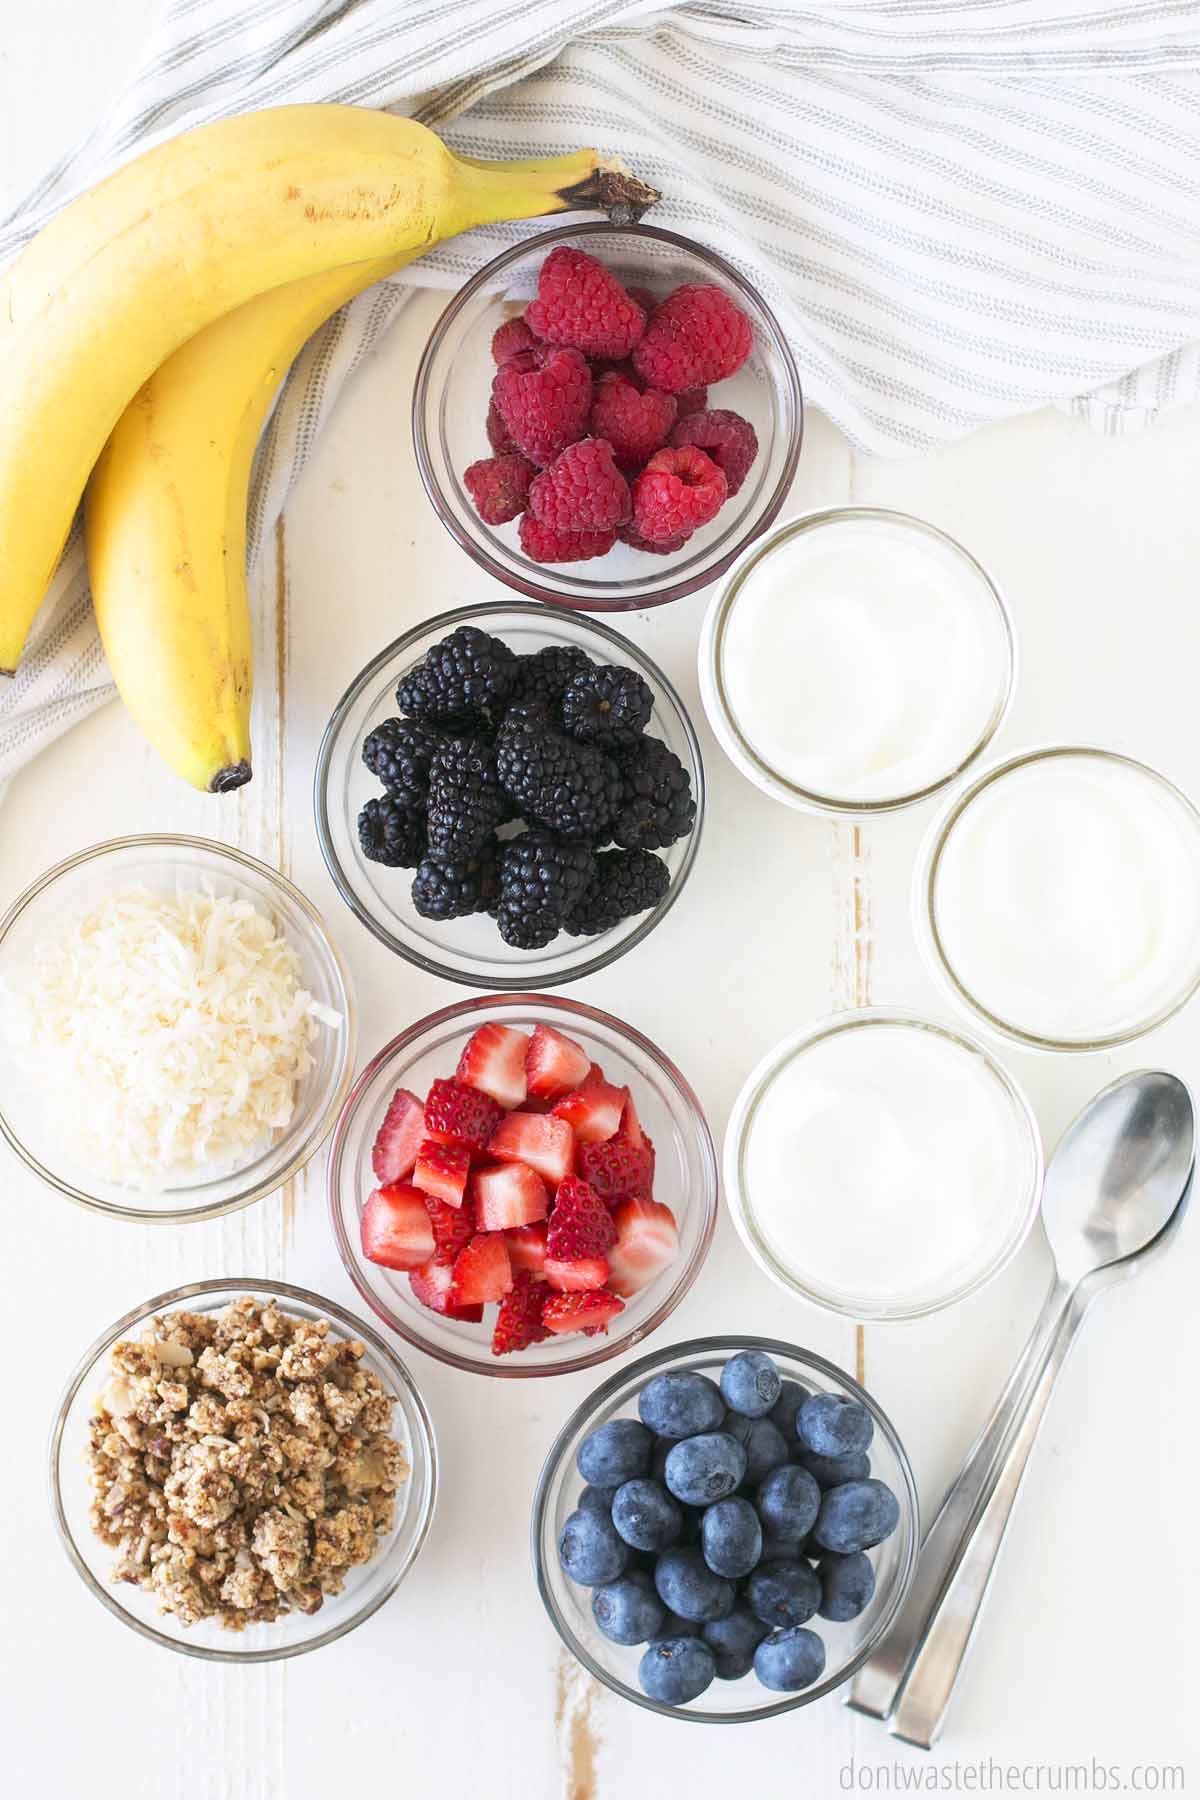 Two bananas next to ingredients for yogurt parfaits. Bowl of raspberries, bowl of black berries, bowl of coconut flakes, bowl of granola, bowl of sliced strawberries, bowl of blueberries, and three jars of yogurt. There are two spoons next to the jars.